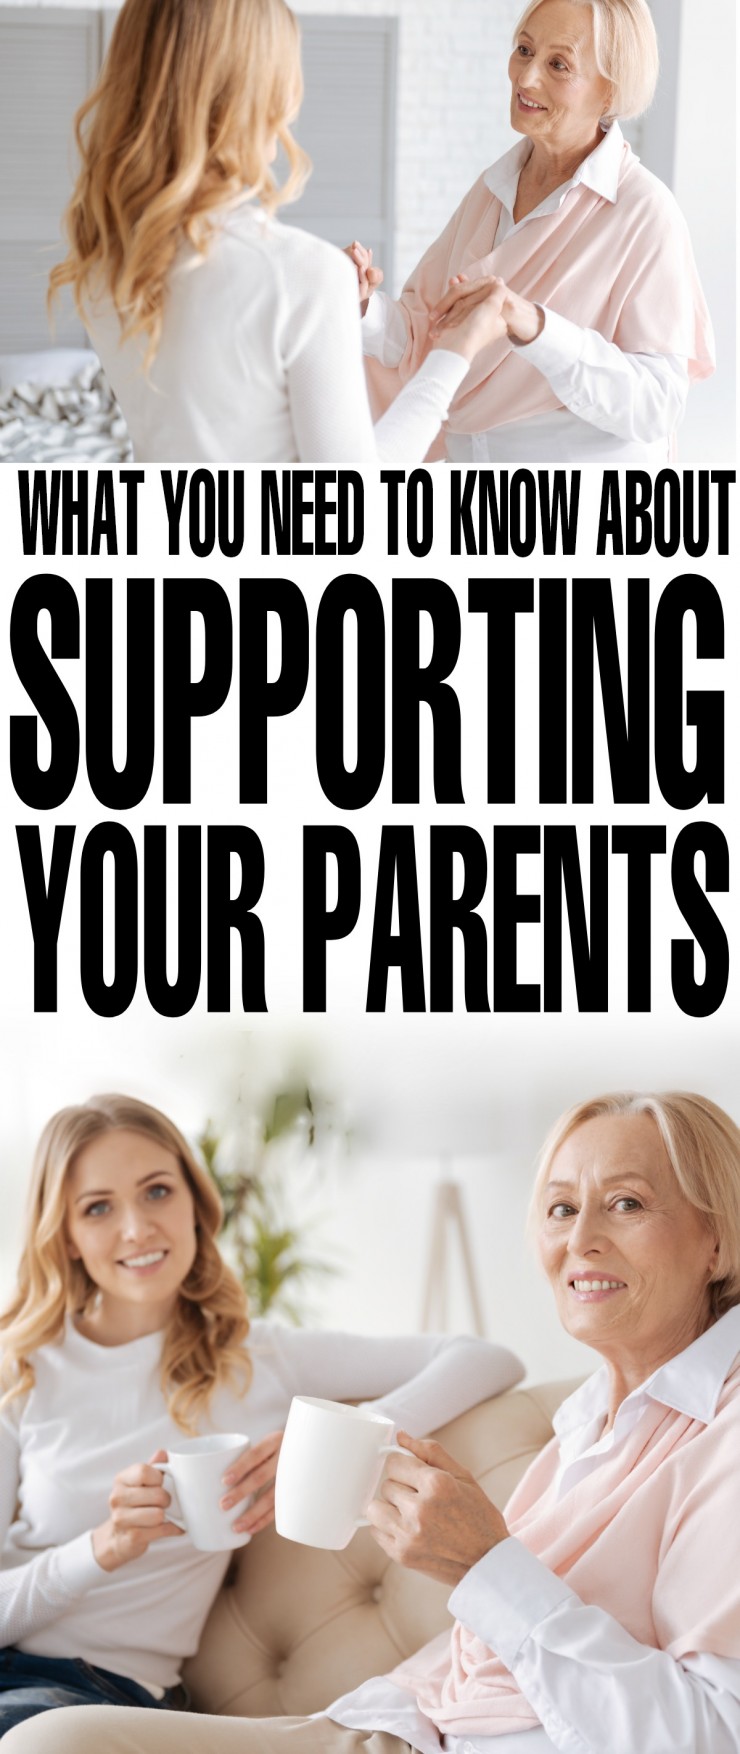 What You Need to Know About Supporting Your Parents